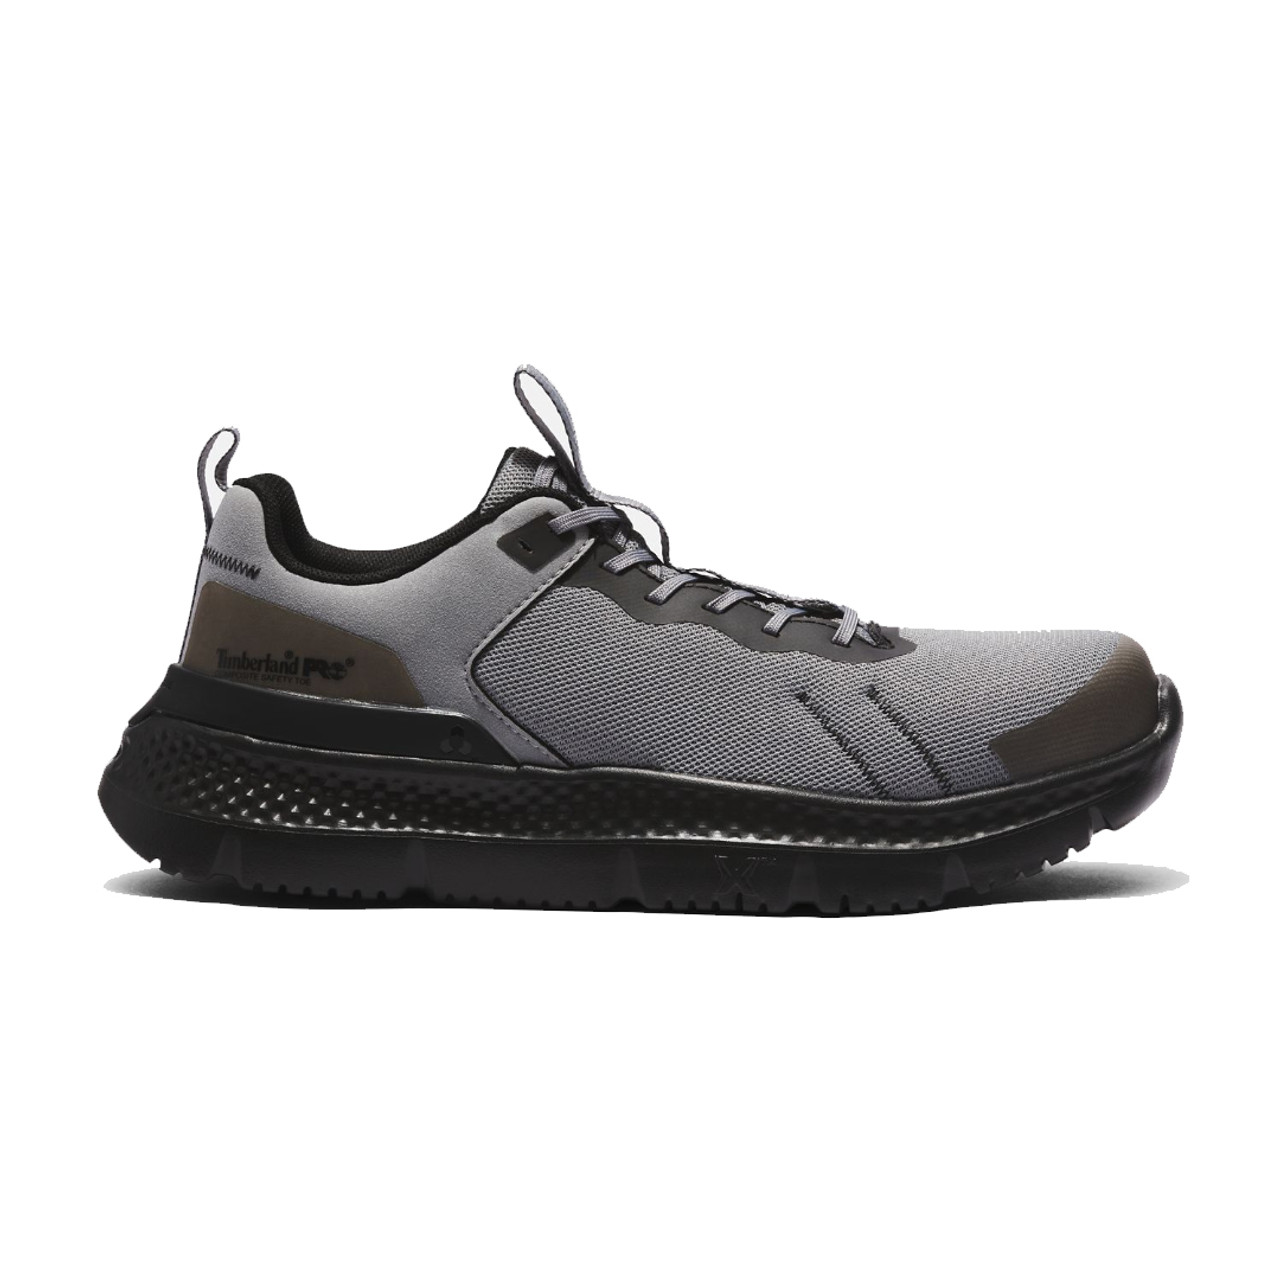 Buy Low-cut safety shoe S1P Lyra online